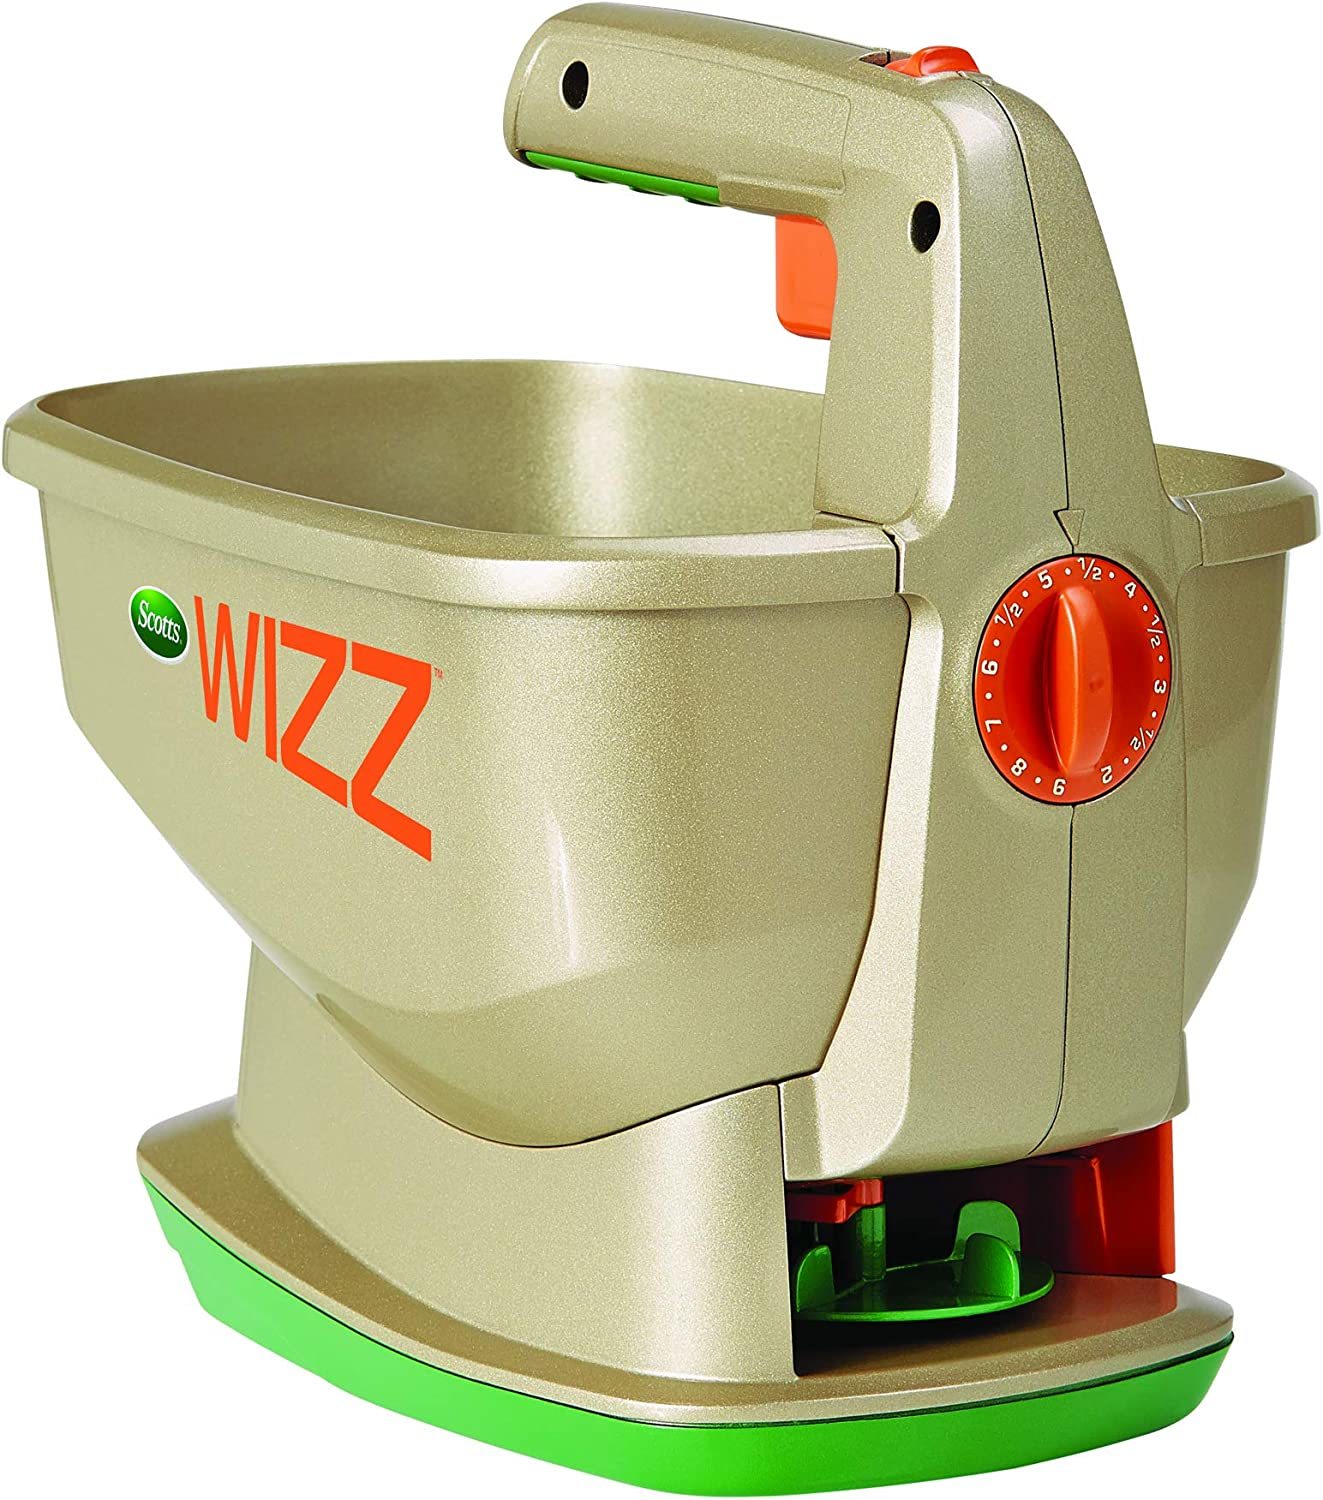 Scotts Wizz Ice, Seed, And Fertilizer Spreader Powered By A Battery. - $50.98